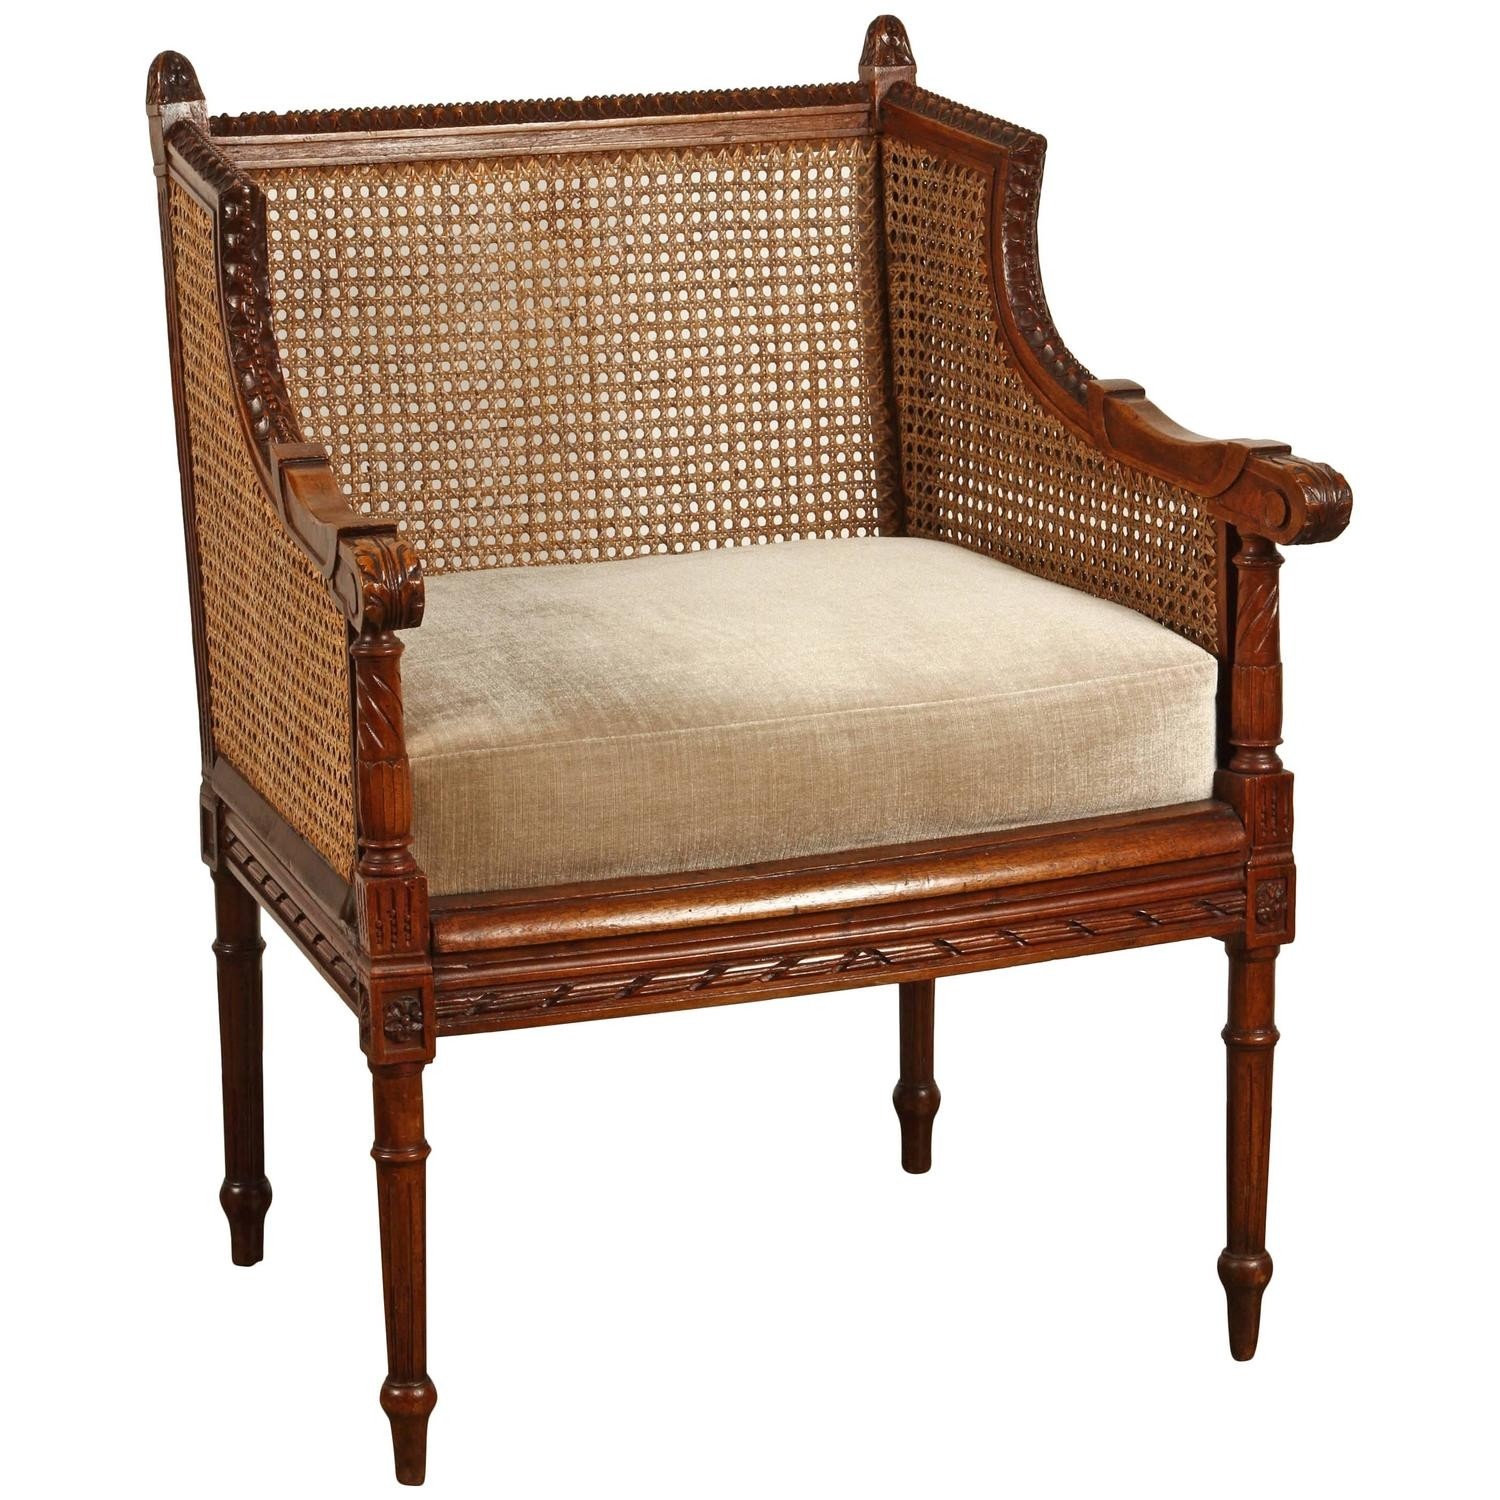 French cushioned cane chair for sale at 1stdibs